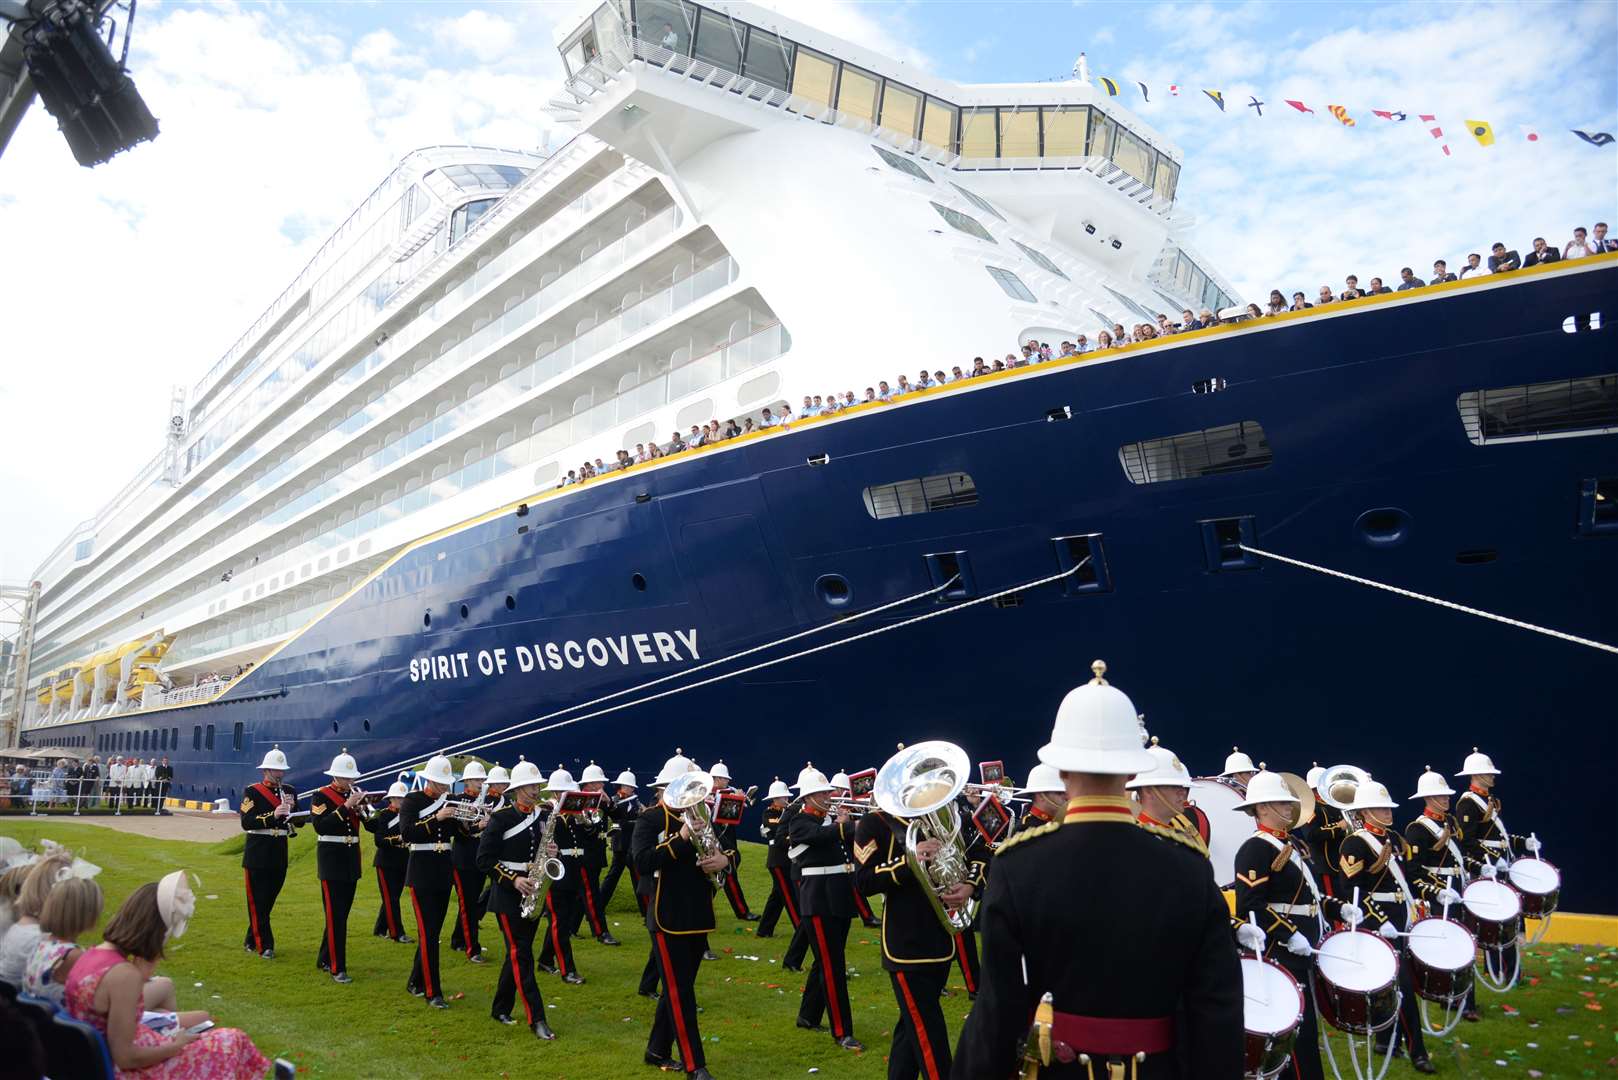 Saga's Spirit of Discovery was officially named in Dover earlier this year